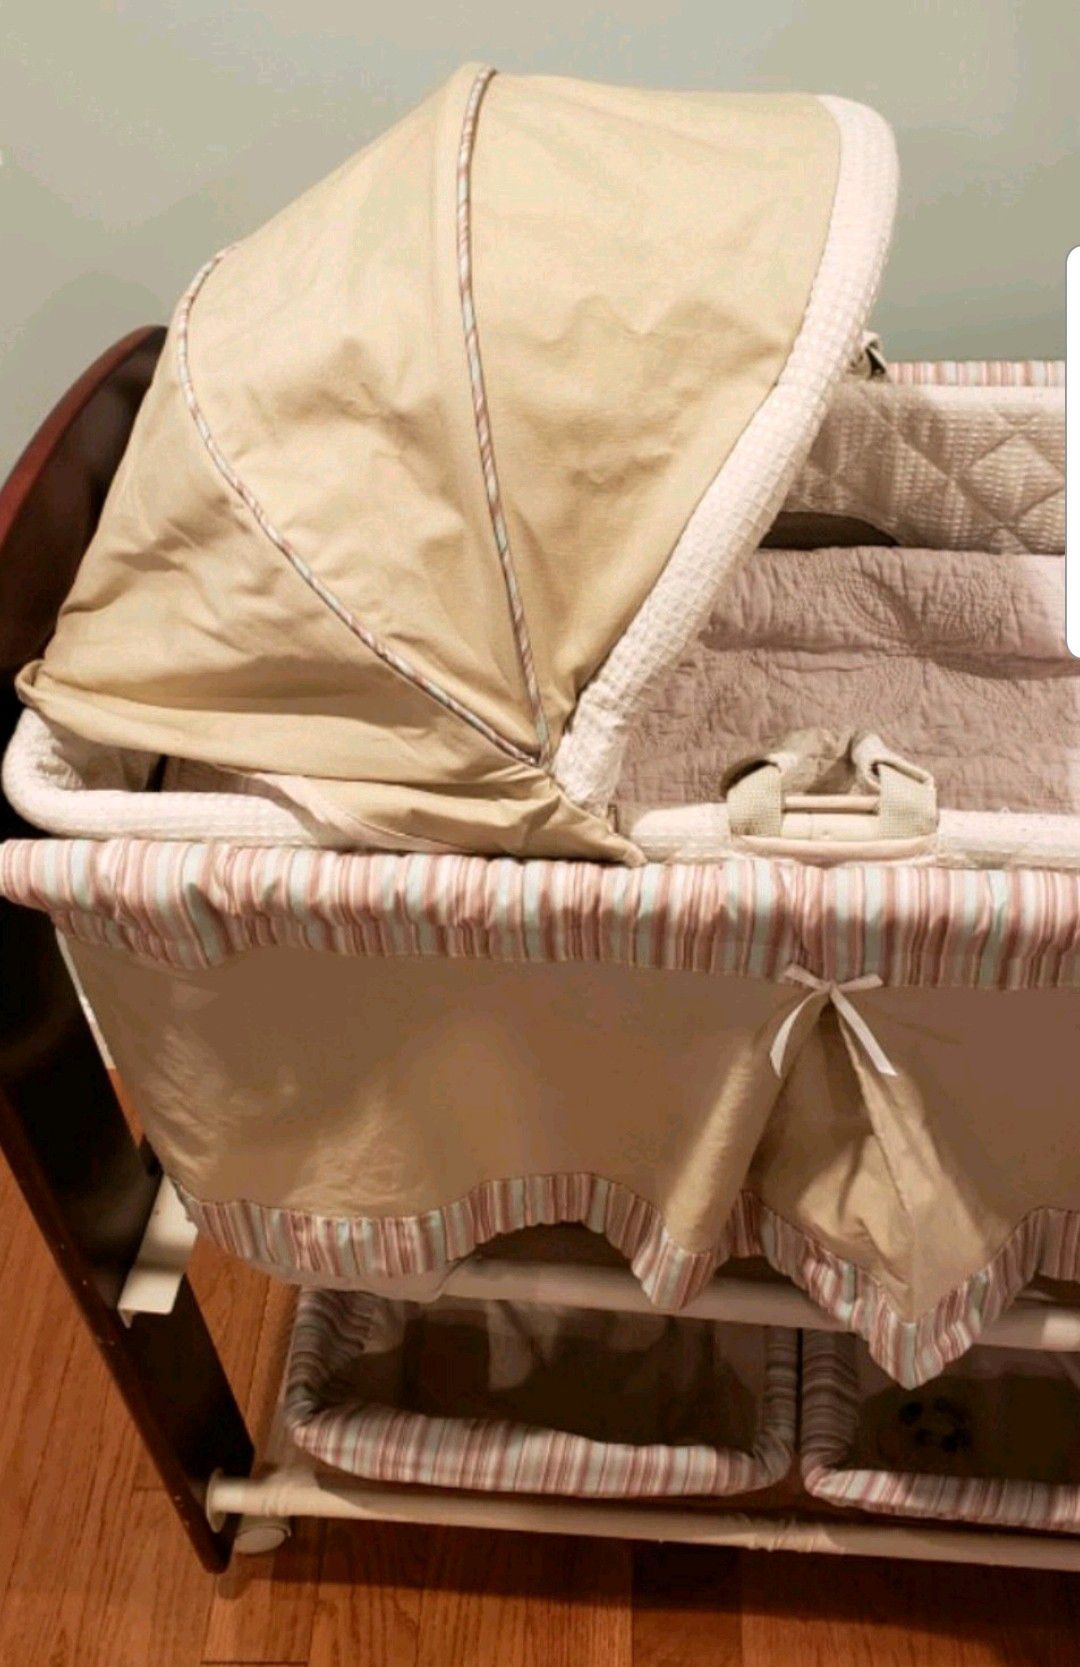 Contours Classique 3 in 1 Bassinet / Changing Table